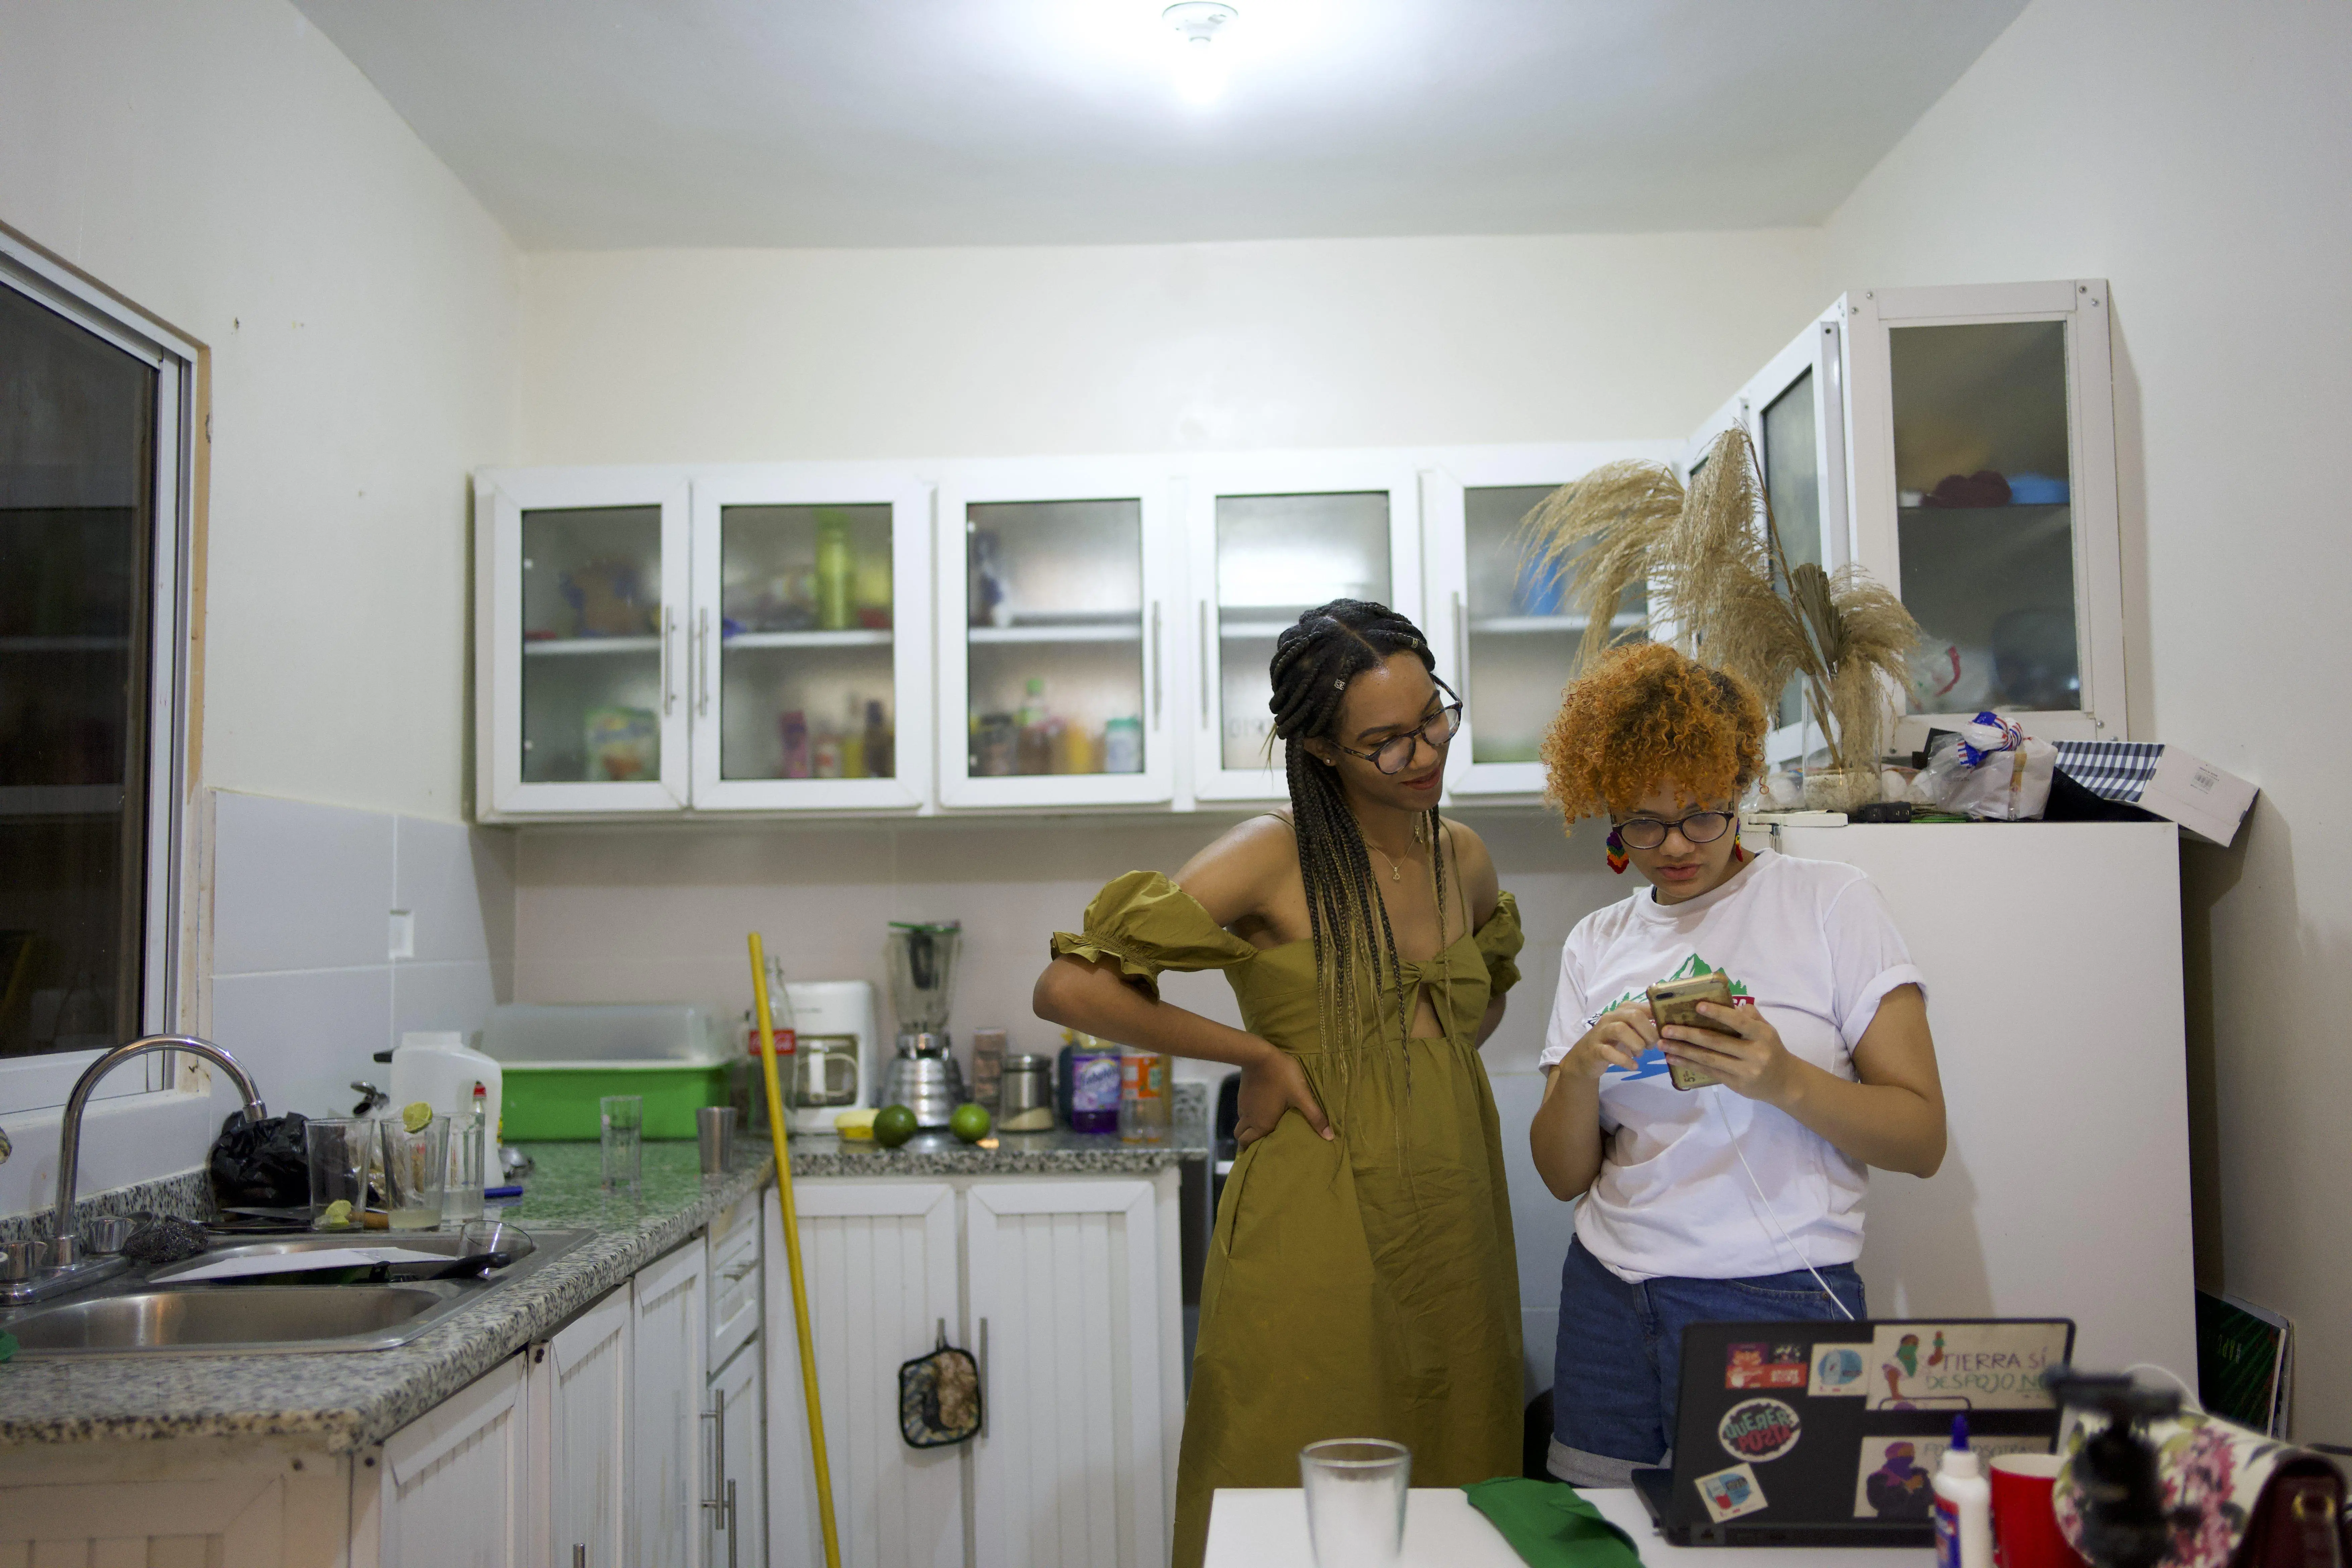 Two women stand in a kitchen while one shows the other women something on her phone.